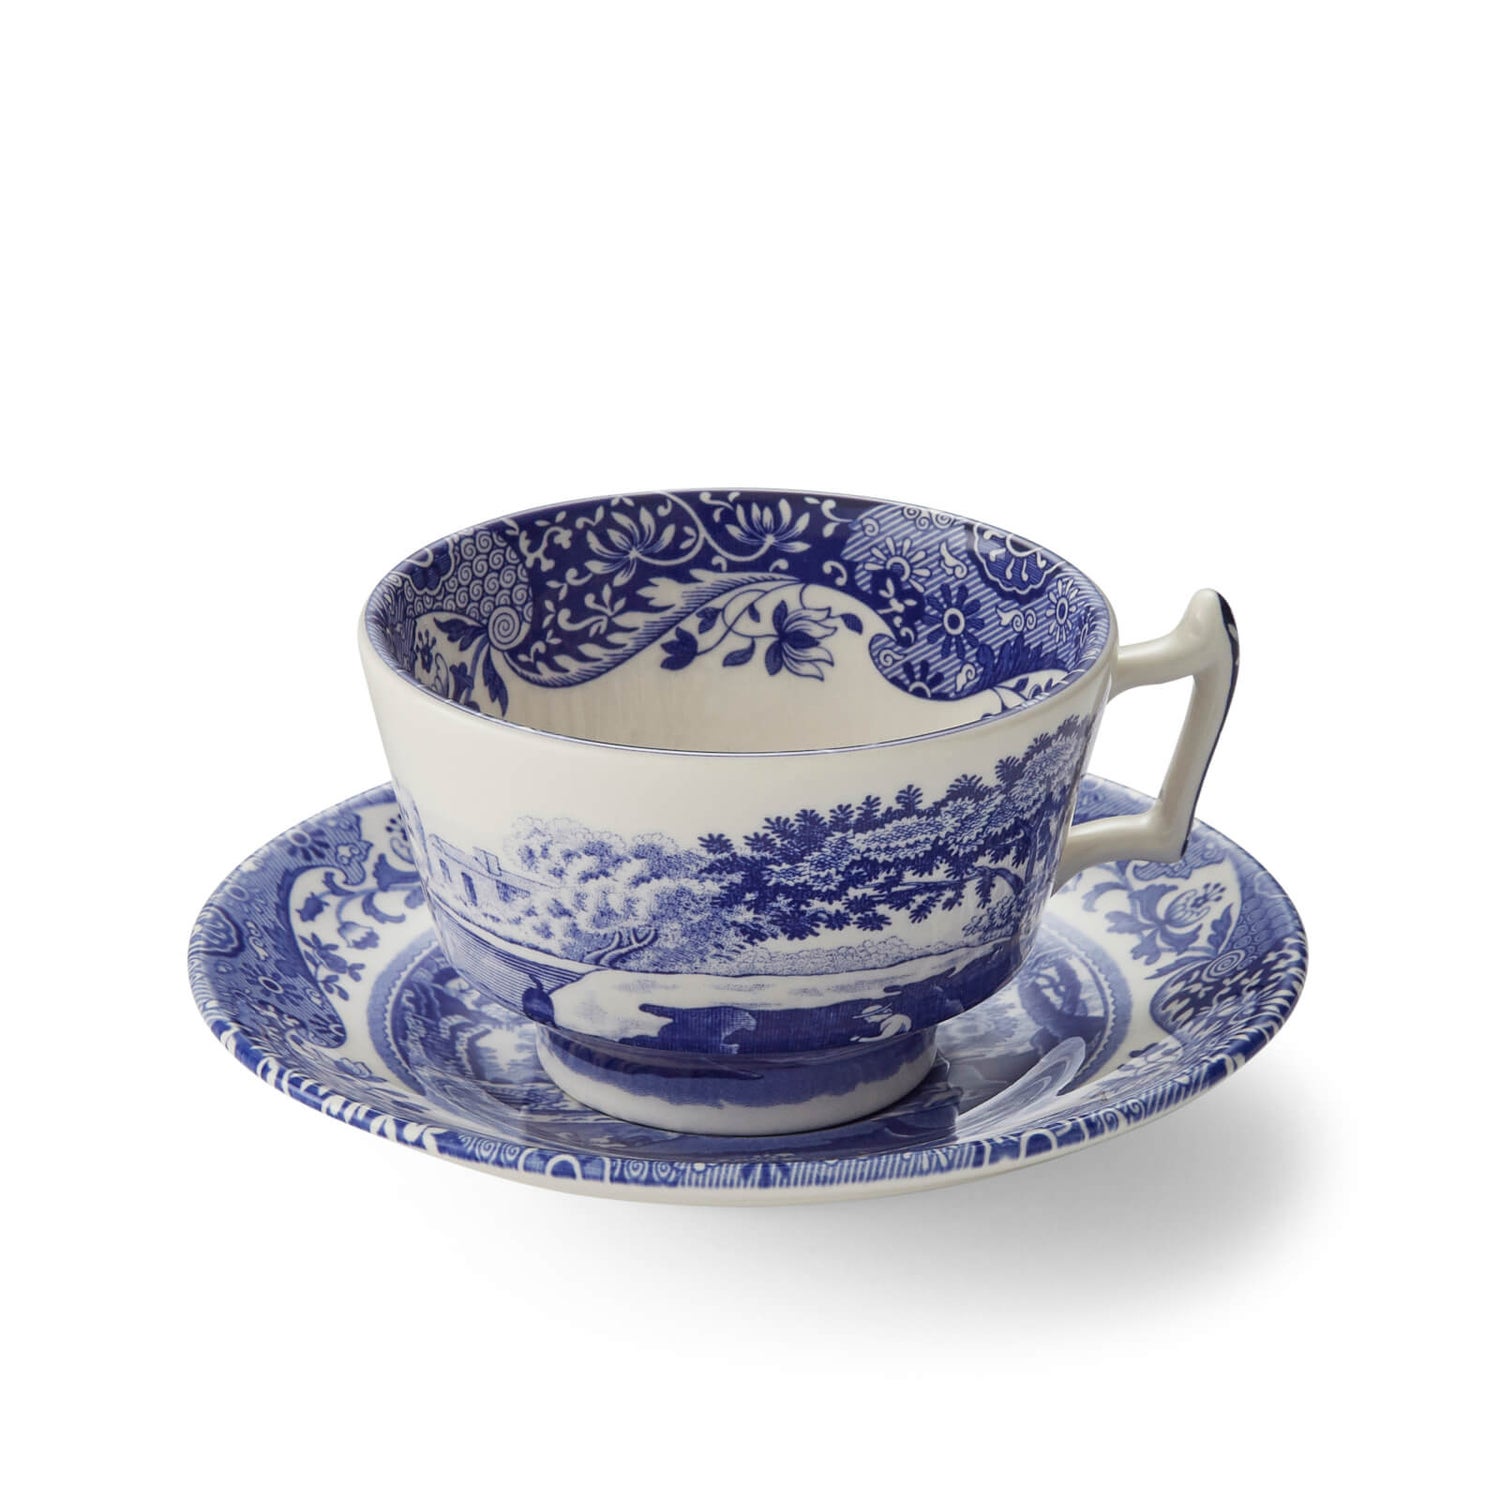 Spode Blue Italian Breakfast Teacup and Saucer (Set of 4)